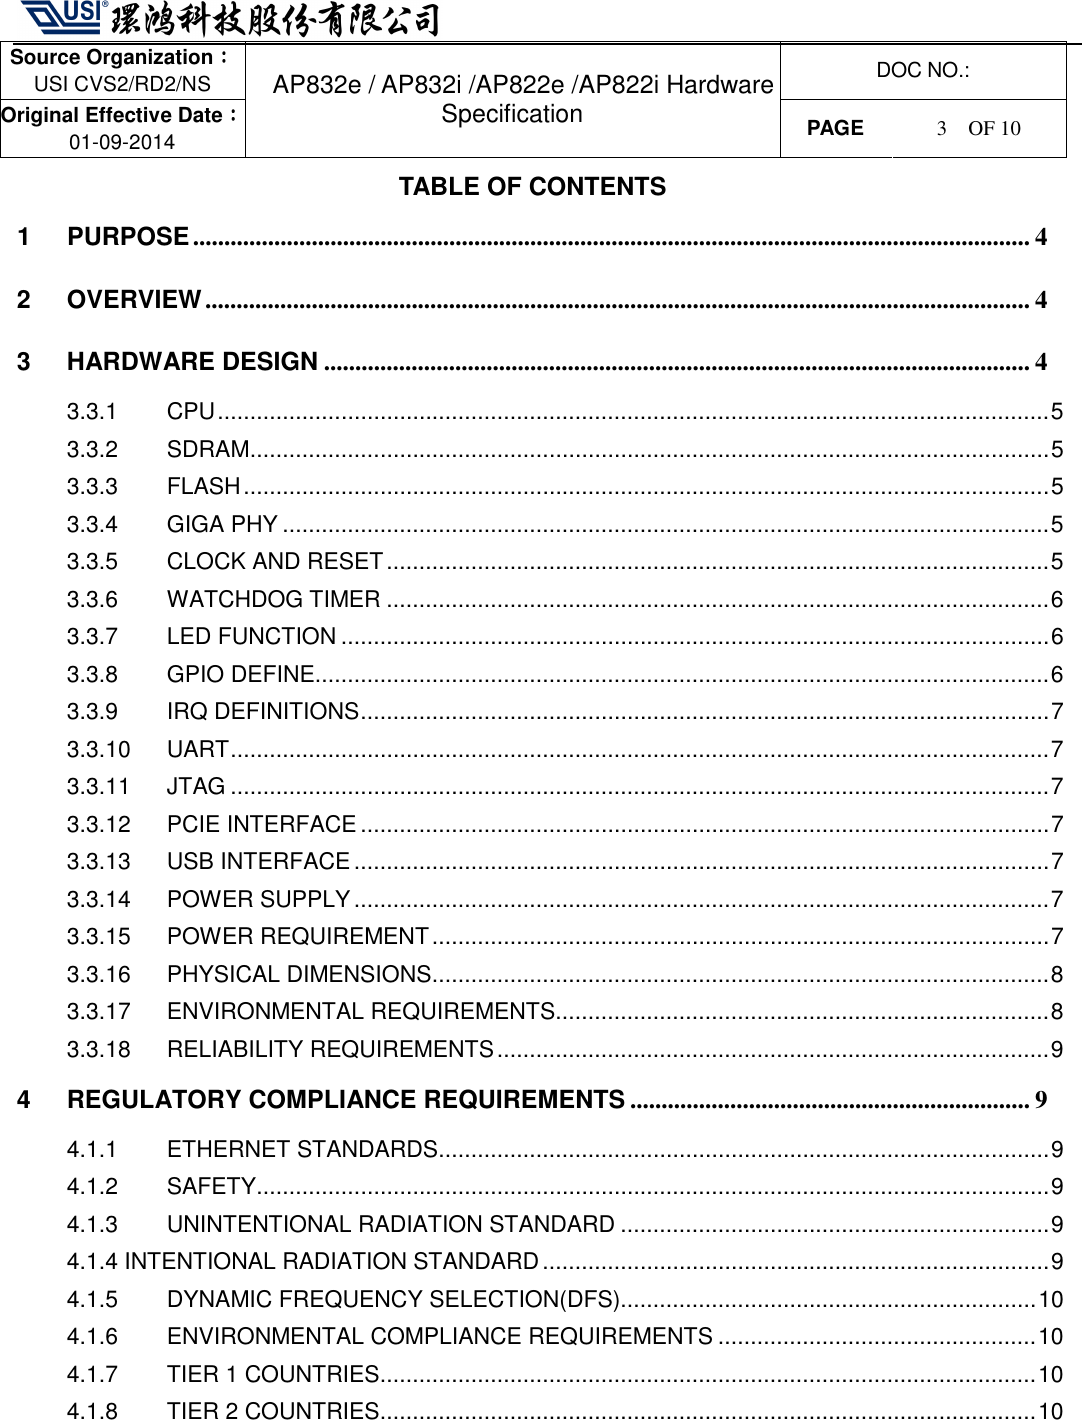   Source Organization：：：： USI CVS2/RD2/NS  DOC NO.: Original Effective Date：：：： 01-09-2014 AP832e / AP832i /AP822e /AP822i Hardware Specification PAGE  3    OF 10   TABLE OF CONTENTS 1 PURPOSE...................................................................................................................................... 4 2 OVERVIEW.................................................................................................................................... 4 3 HARDWARE DESIGN ................................................................................................................. 4 3.3.1 CPU................................................................................................................................5 3.3.2 SDRAM...........................................................................................................................5 3.3.3 FLASH............................................................................................................................5 3.3.4 GIGA PHY ......................................................................................................................5 3.3.5 CLOCK AND RESET......................................................................................................5 3.3.6 WATCHDOG TIMER ......................................................................................................6 3.3.7 LED FUNCTION .............................................................................................................6 3.3.8 GPIO DEFINE.................................................................................................................6 3.3.9 IRQ DEFINITIONS..........................................................................................................7 3.3.10 UART..............................................................................................................................7 3.3.11 JTAG ..............................................................................................................................7 3.3.12 PCIE INTERFACE..........................................................................................................7 3.3.13 USB INTERFACE...........................................................................................................7 3.3.14 POWER SUPPLY...........................................................................................................7 3.3.15 POWER REQUIREMENT...............................................................................................7 3.3.16 PHYSICAL DIMENSIONS...............................................................................................8 3.3.17 ENVIRONMENTAL REQUIREMENTS............................................................................8 3.3.18 RELIABILITY REQUIREMENTS.....................................................................................9 4 REGULATORY COMPLIANCE REQUIREMENTS ................................................................ 9 4.1.1 ETHERNET STANDARDS..............................................................................................9 4.1.2 SAFETY..........................................................................................................................9 4.1.3 UNINTENTIONAL RADIATION STANDARD ..................................................................9 4.1.4 INTENTIONAL RADIATION STANDARD..............................................................................9 4.1.5 DYNAMIC FREQUENCY SELECTION(DFS)................................................................10 4.1.6 ENVIRONMENTAL COMPLIANCE REQUIREMENTS .................................................10 4.1.7 TIER 1 COUNTRIES.....................................................................................................10 4.1.8 TIER 2 COUNTRIES.....................................................................................................10    